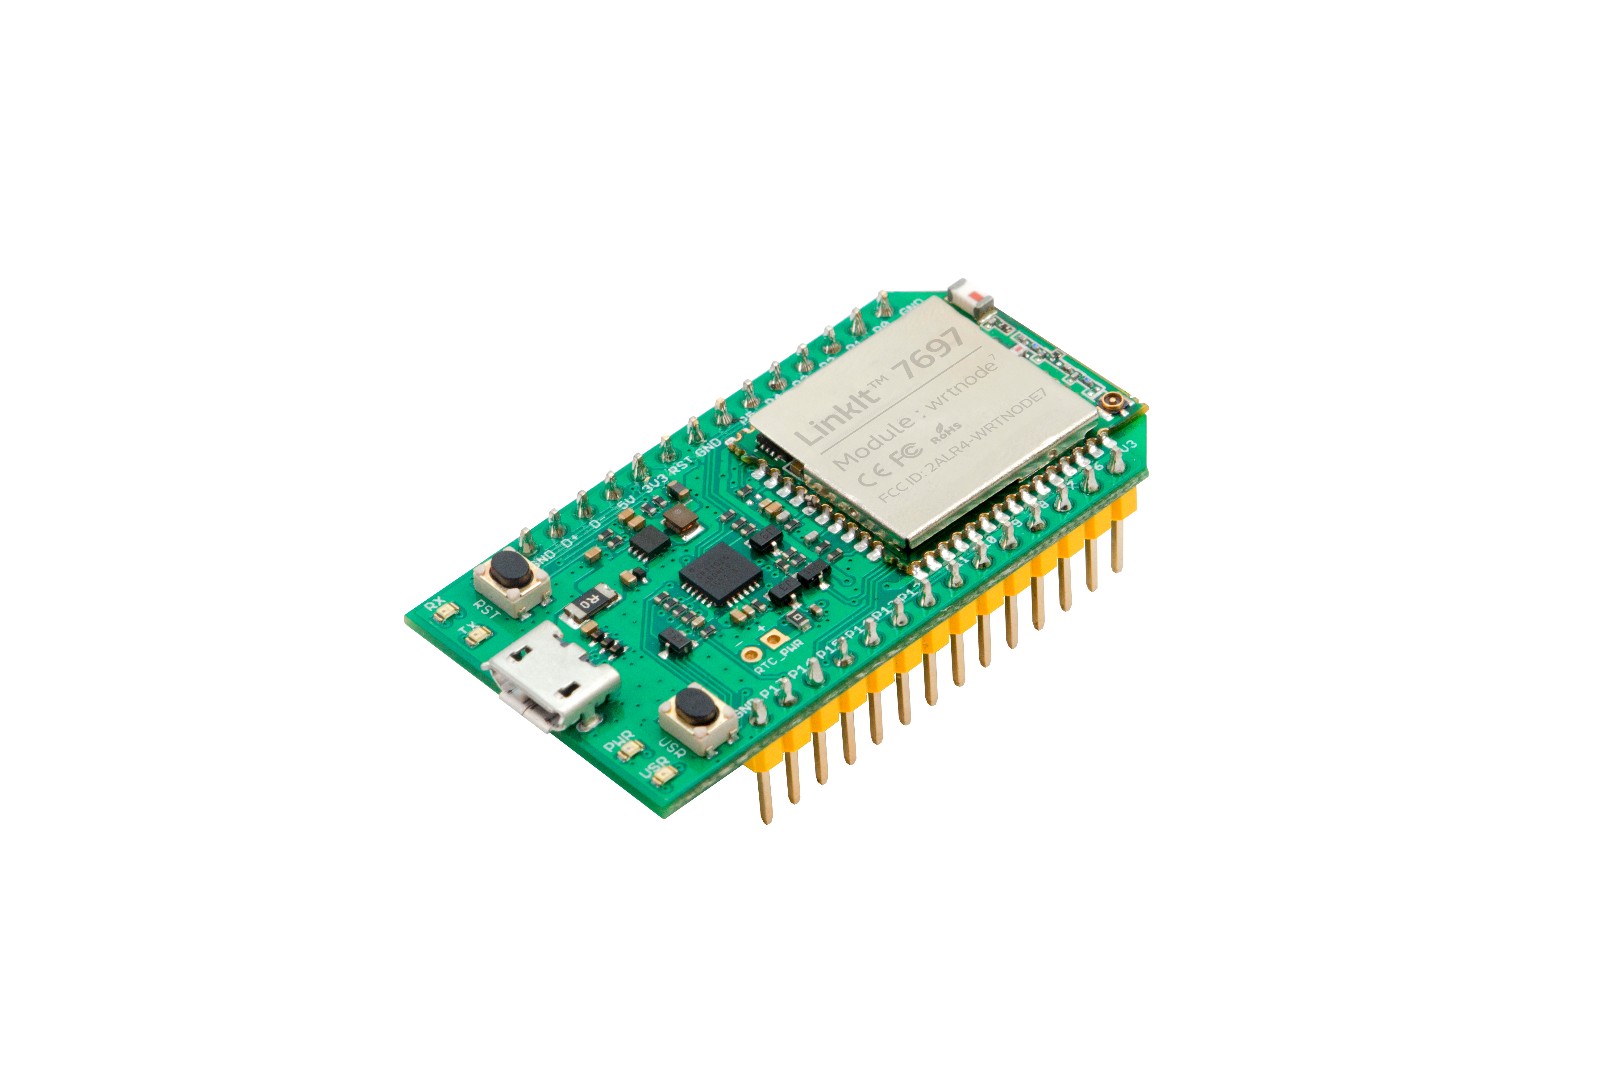 LinkIt 7697 board with MT7697